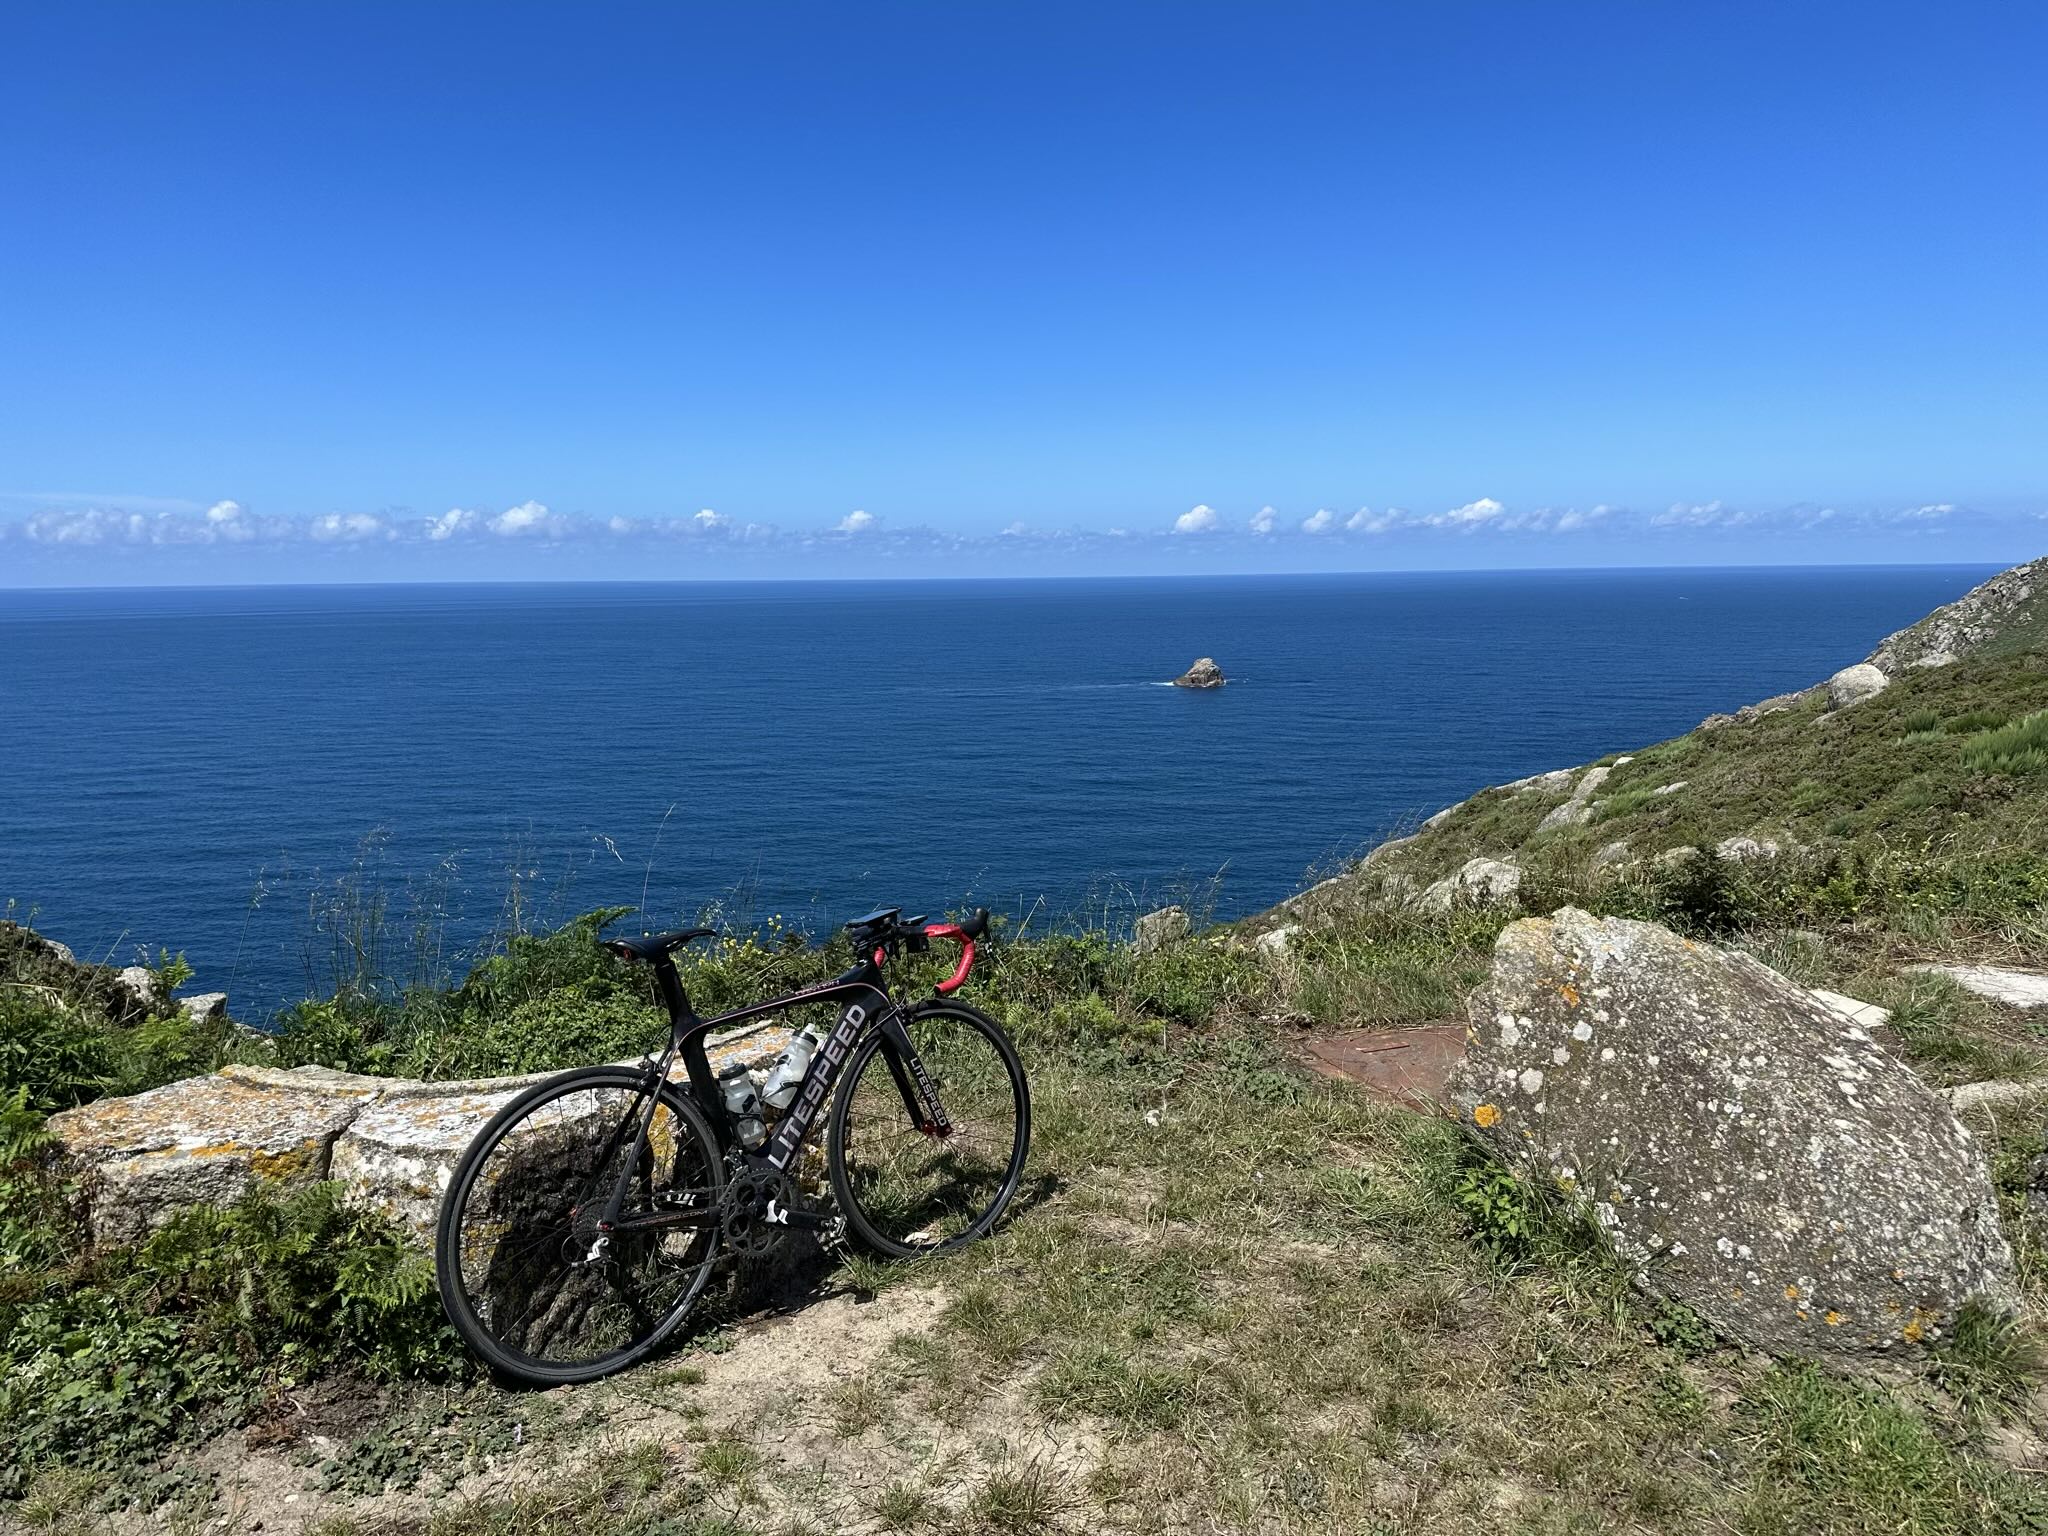 The Litespeed Archon C2 in Fisterra, with the north Atlantic Ocean in the background.